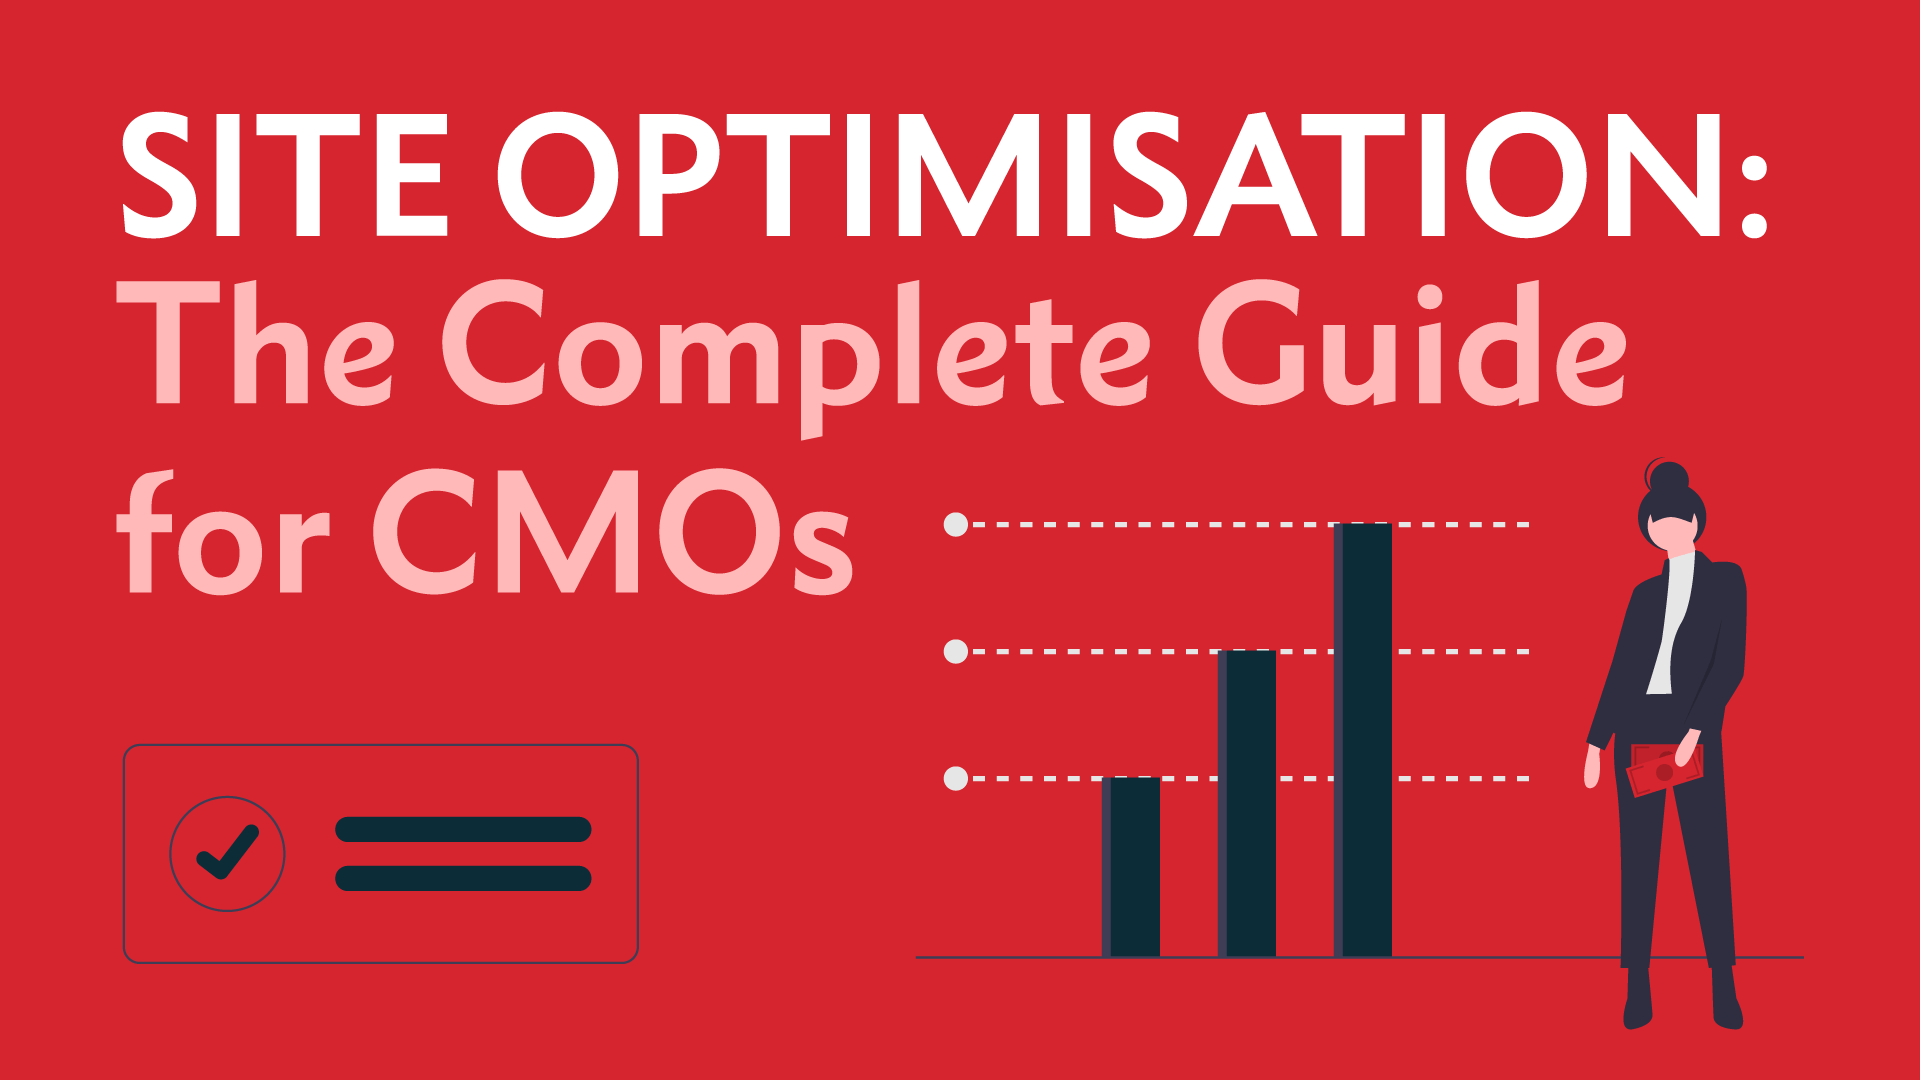 Site Optimisation: The Complete Guide for CMOs